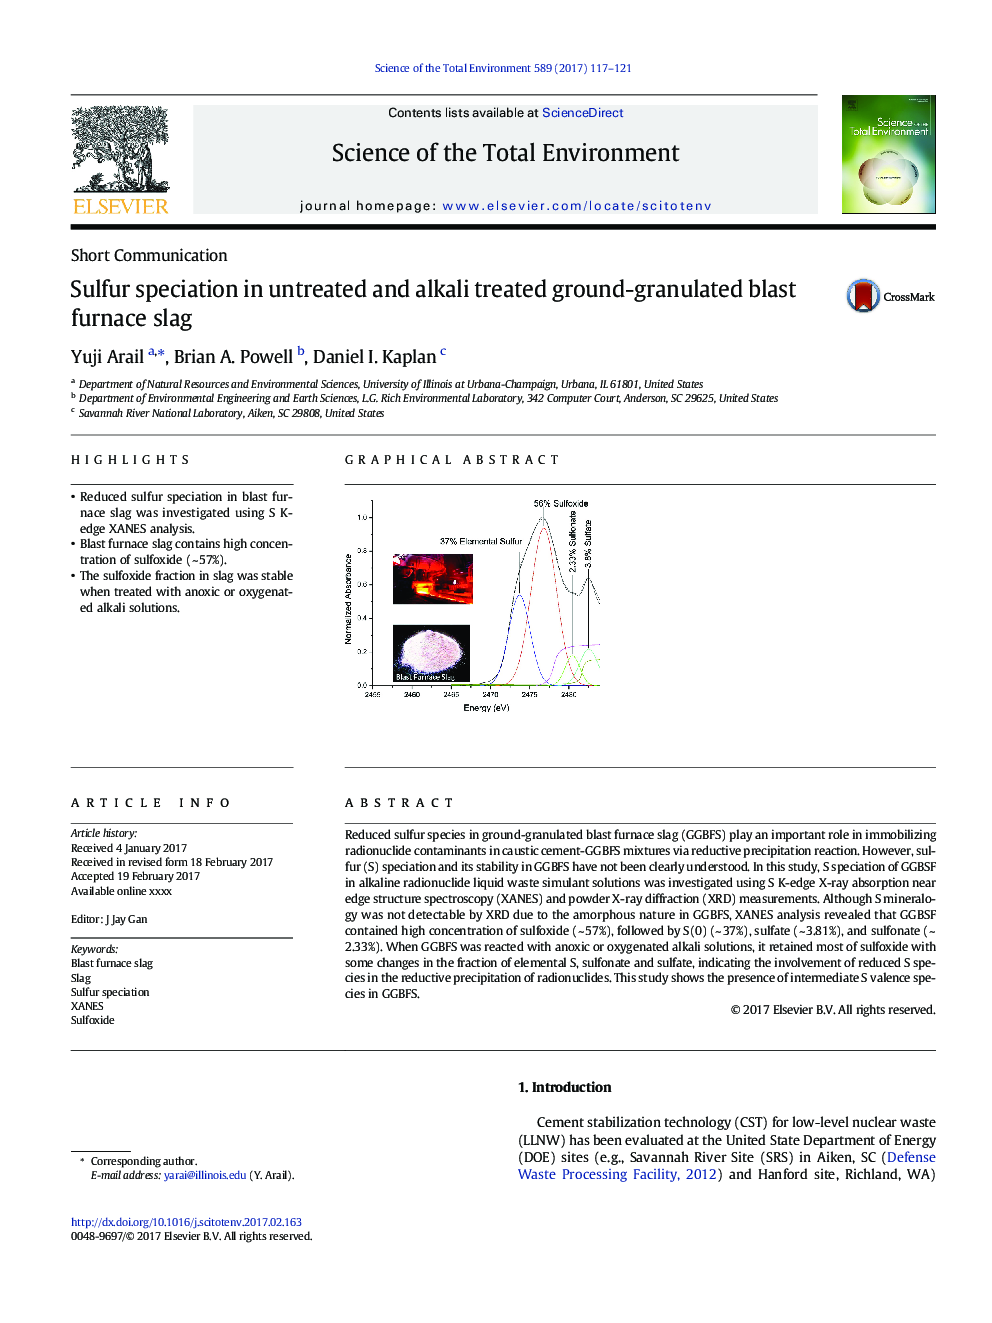 Sulfur speciation in untreated and alkali treated ground-granulated blast furnace slag